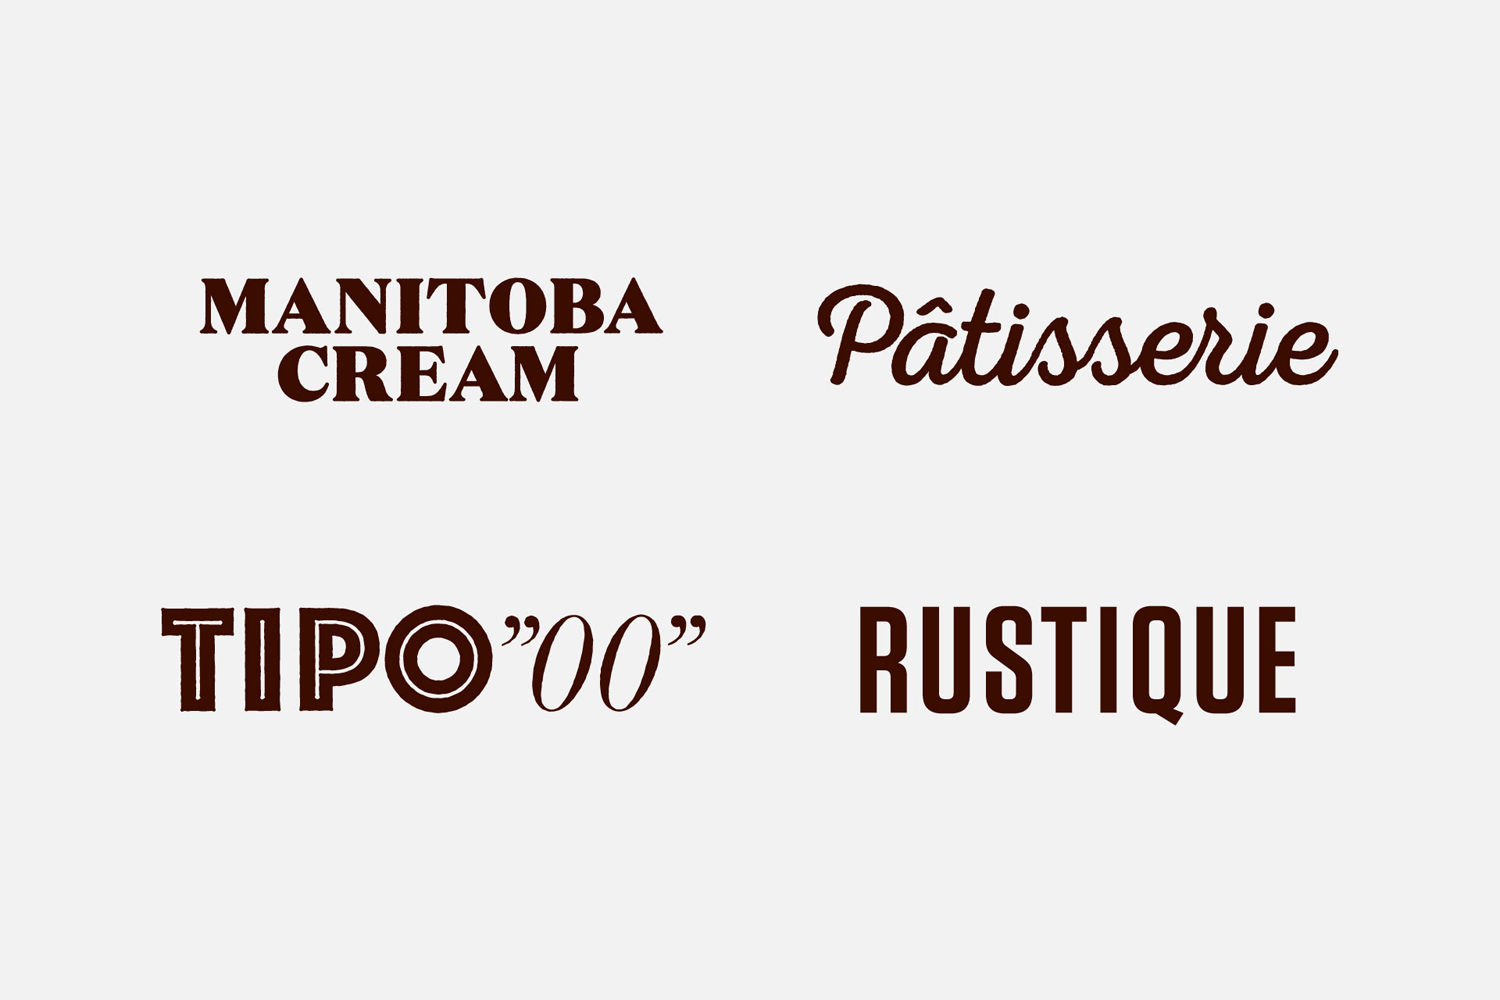 Branding and type for Swedish flour business Ramlösa Kvarn by Amore.